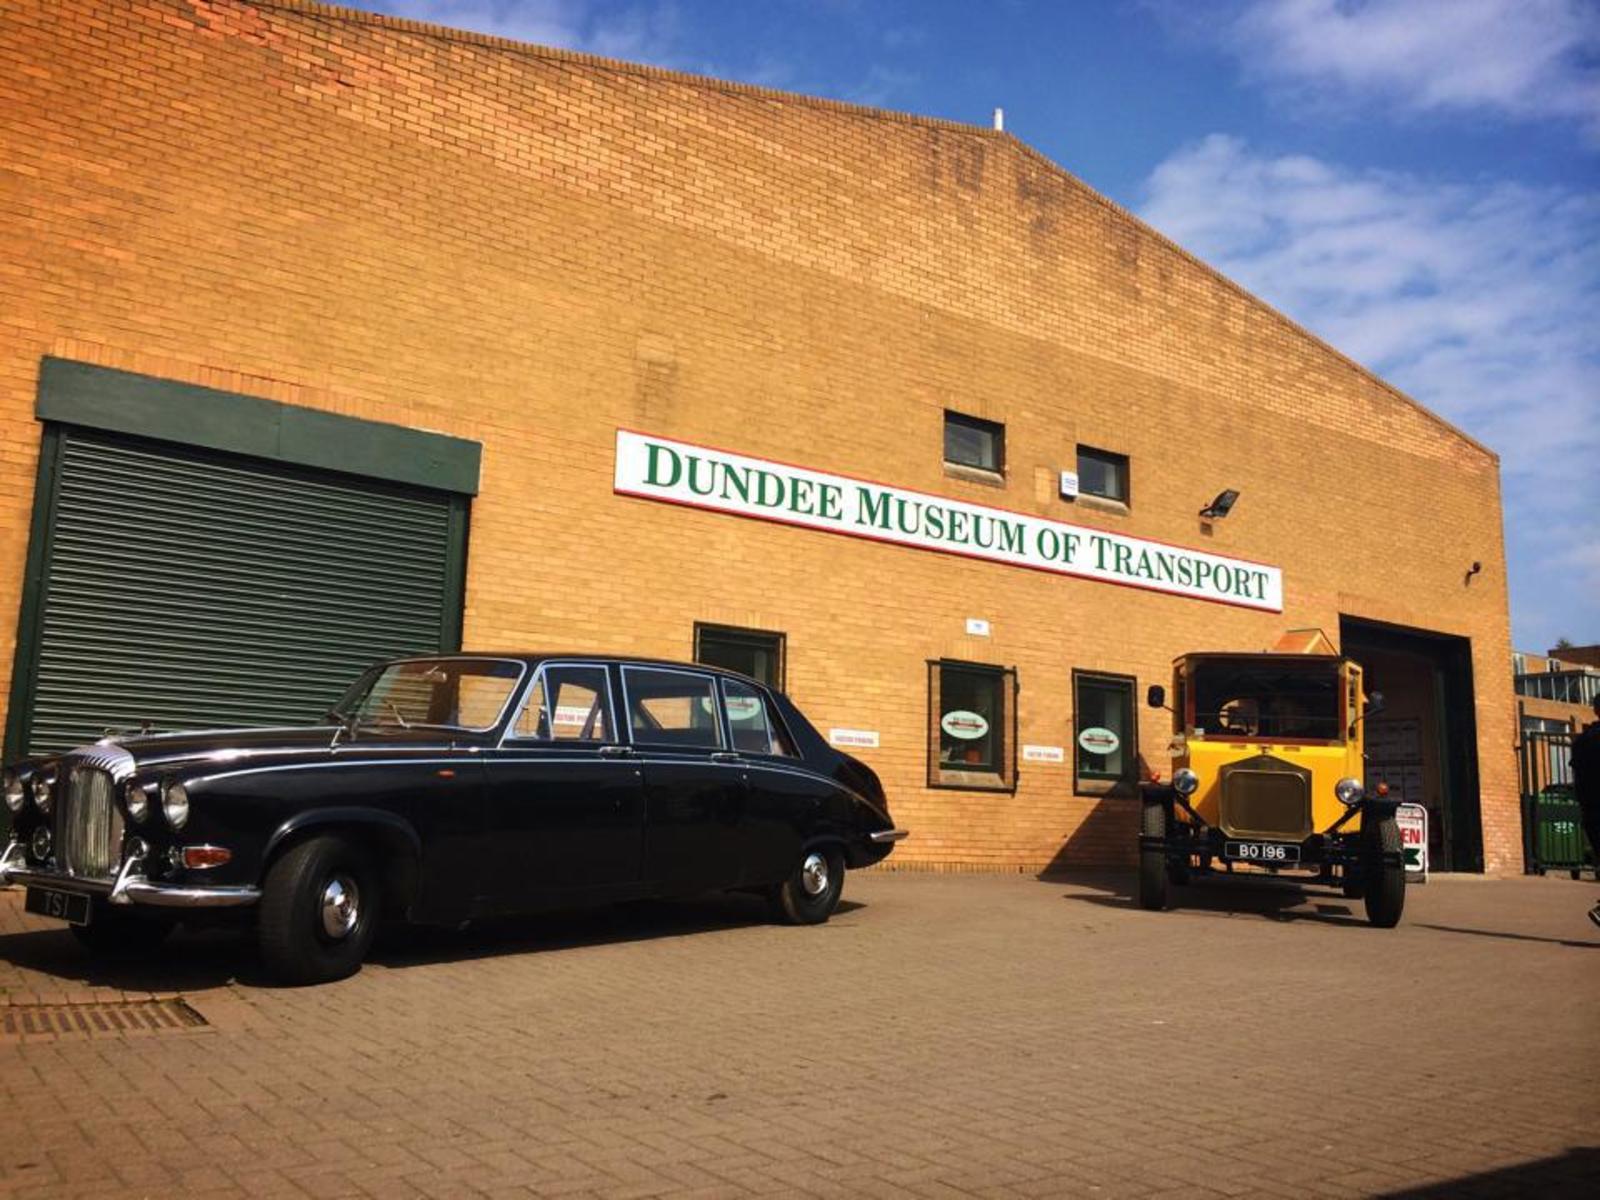 Dundee Museum of Transport dundee